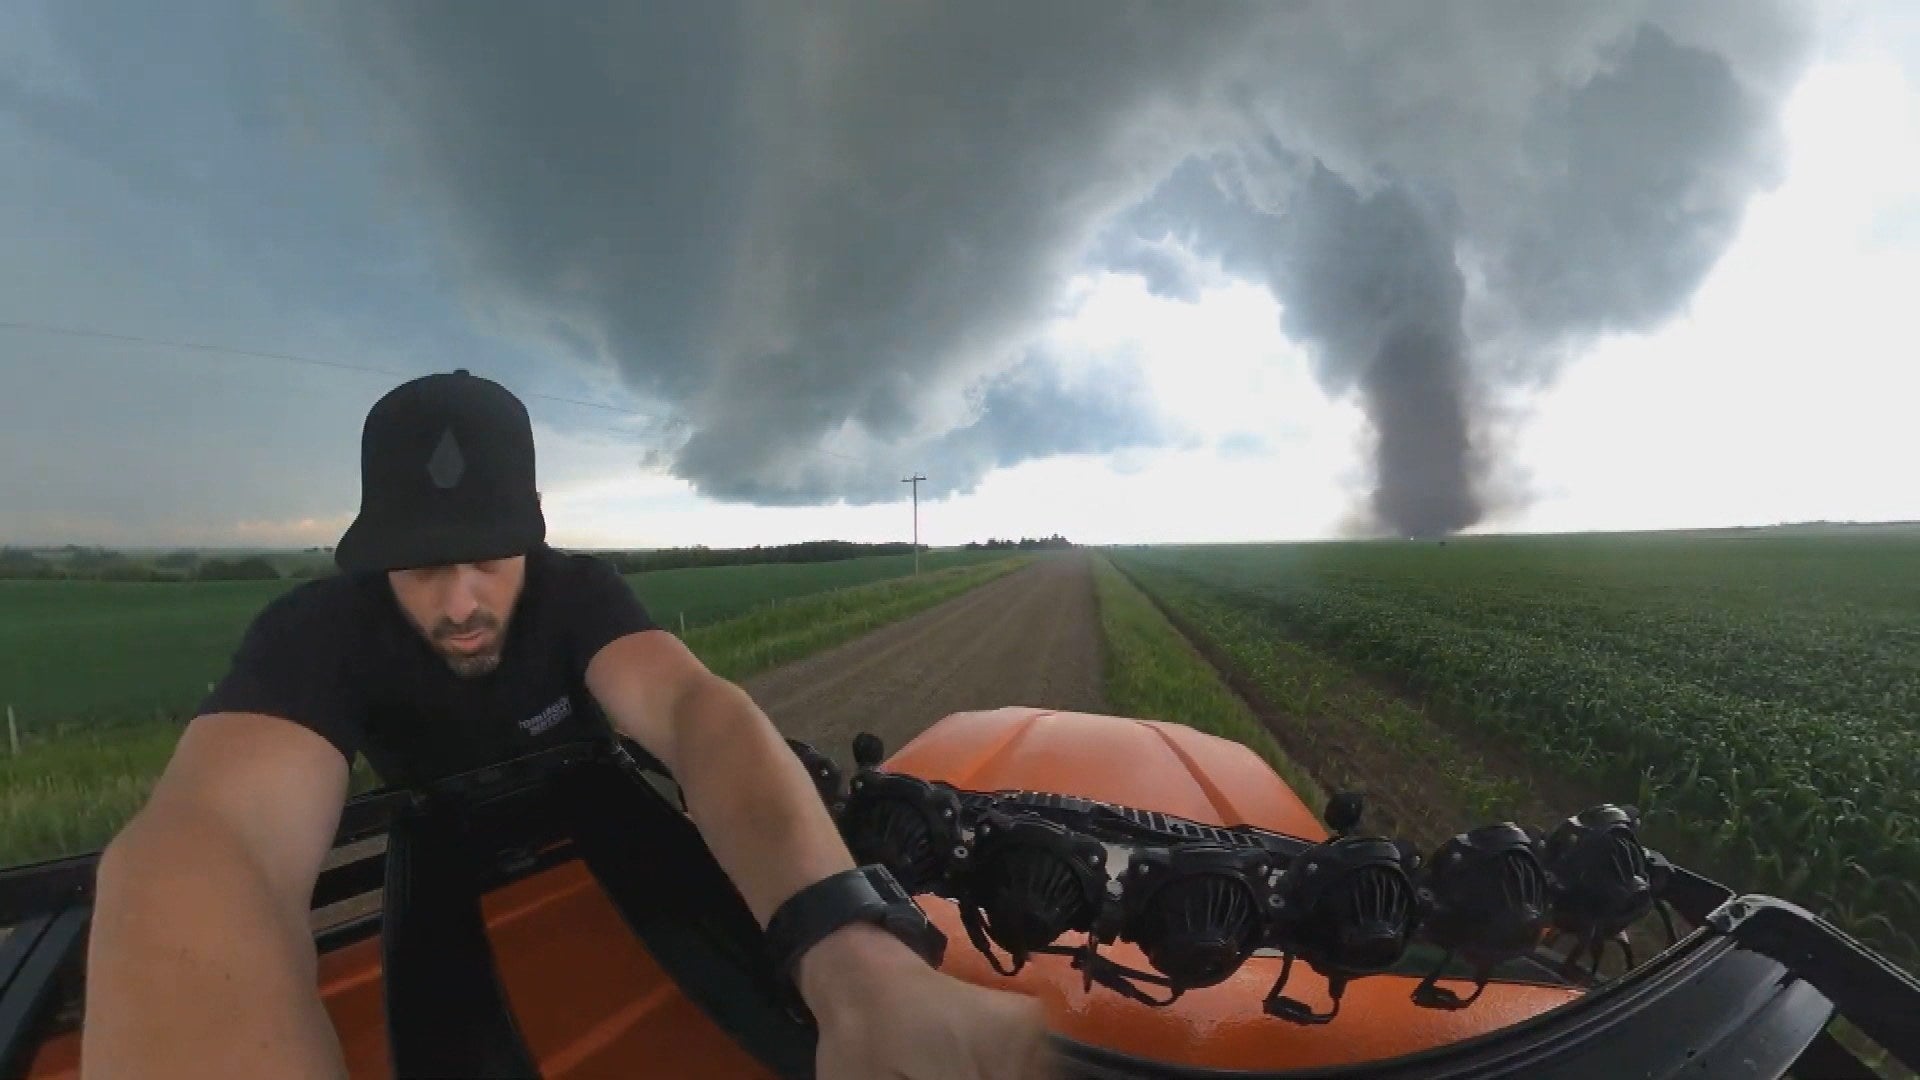 Will 'Twister' Movie Inspire People to Become Storm Chasers?